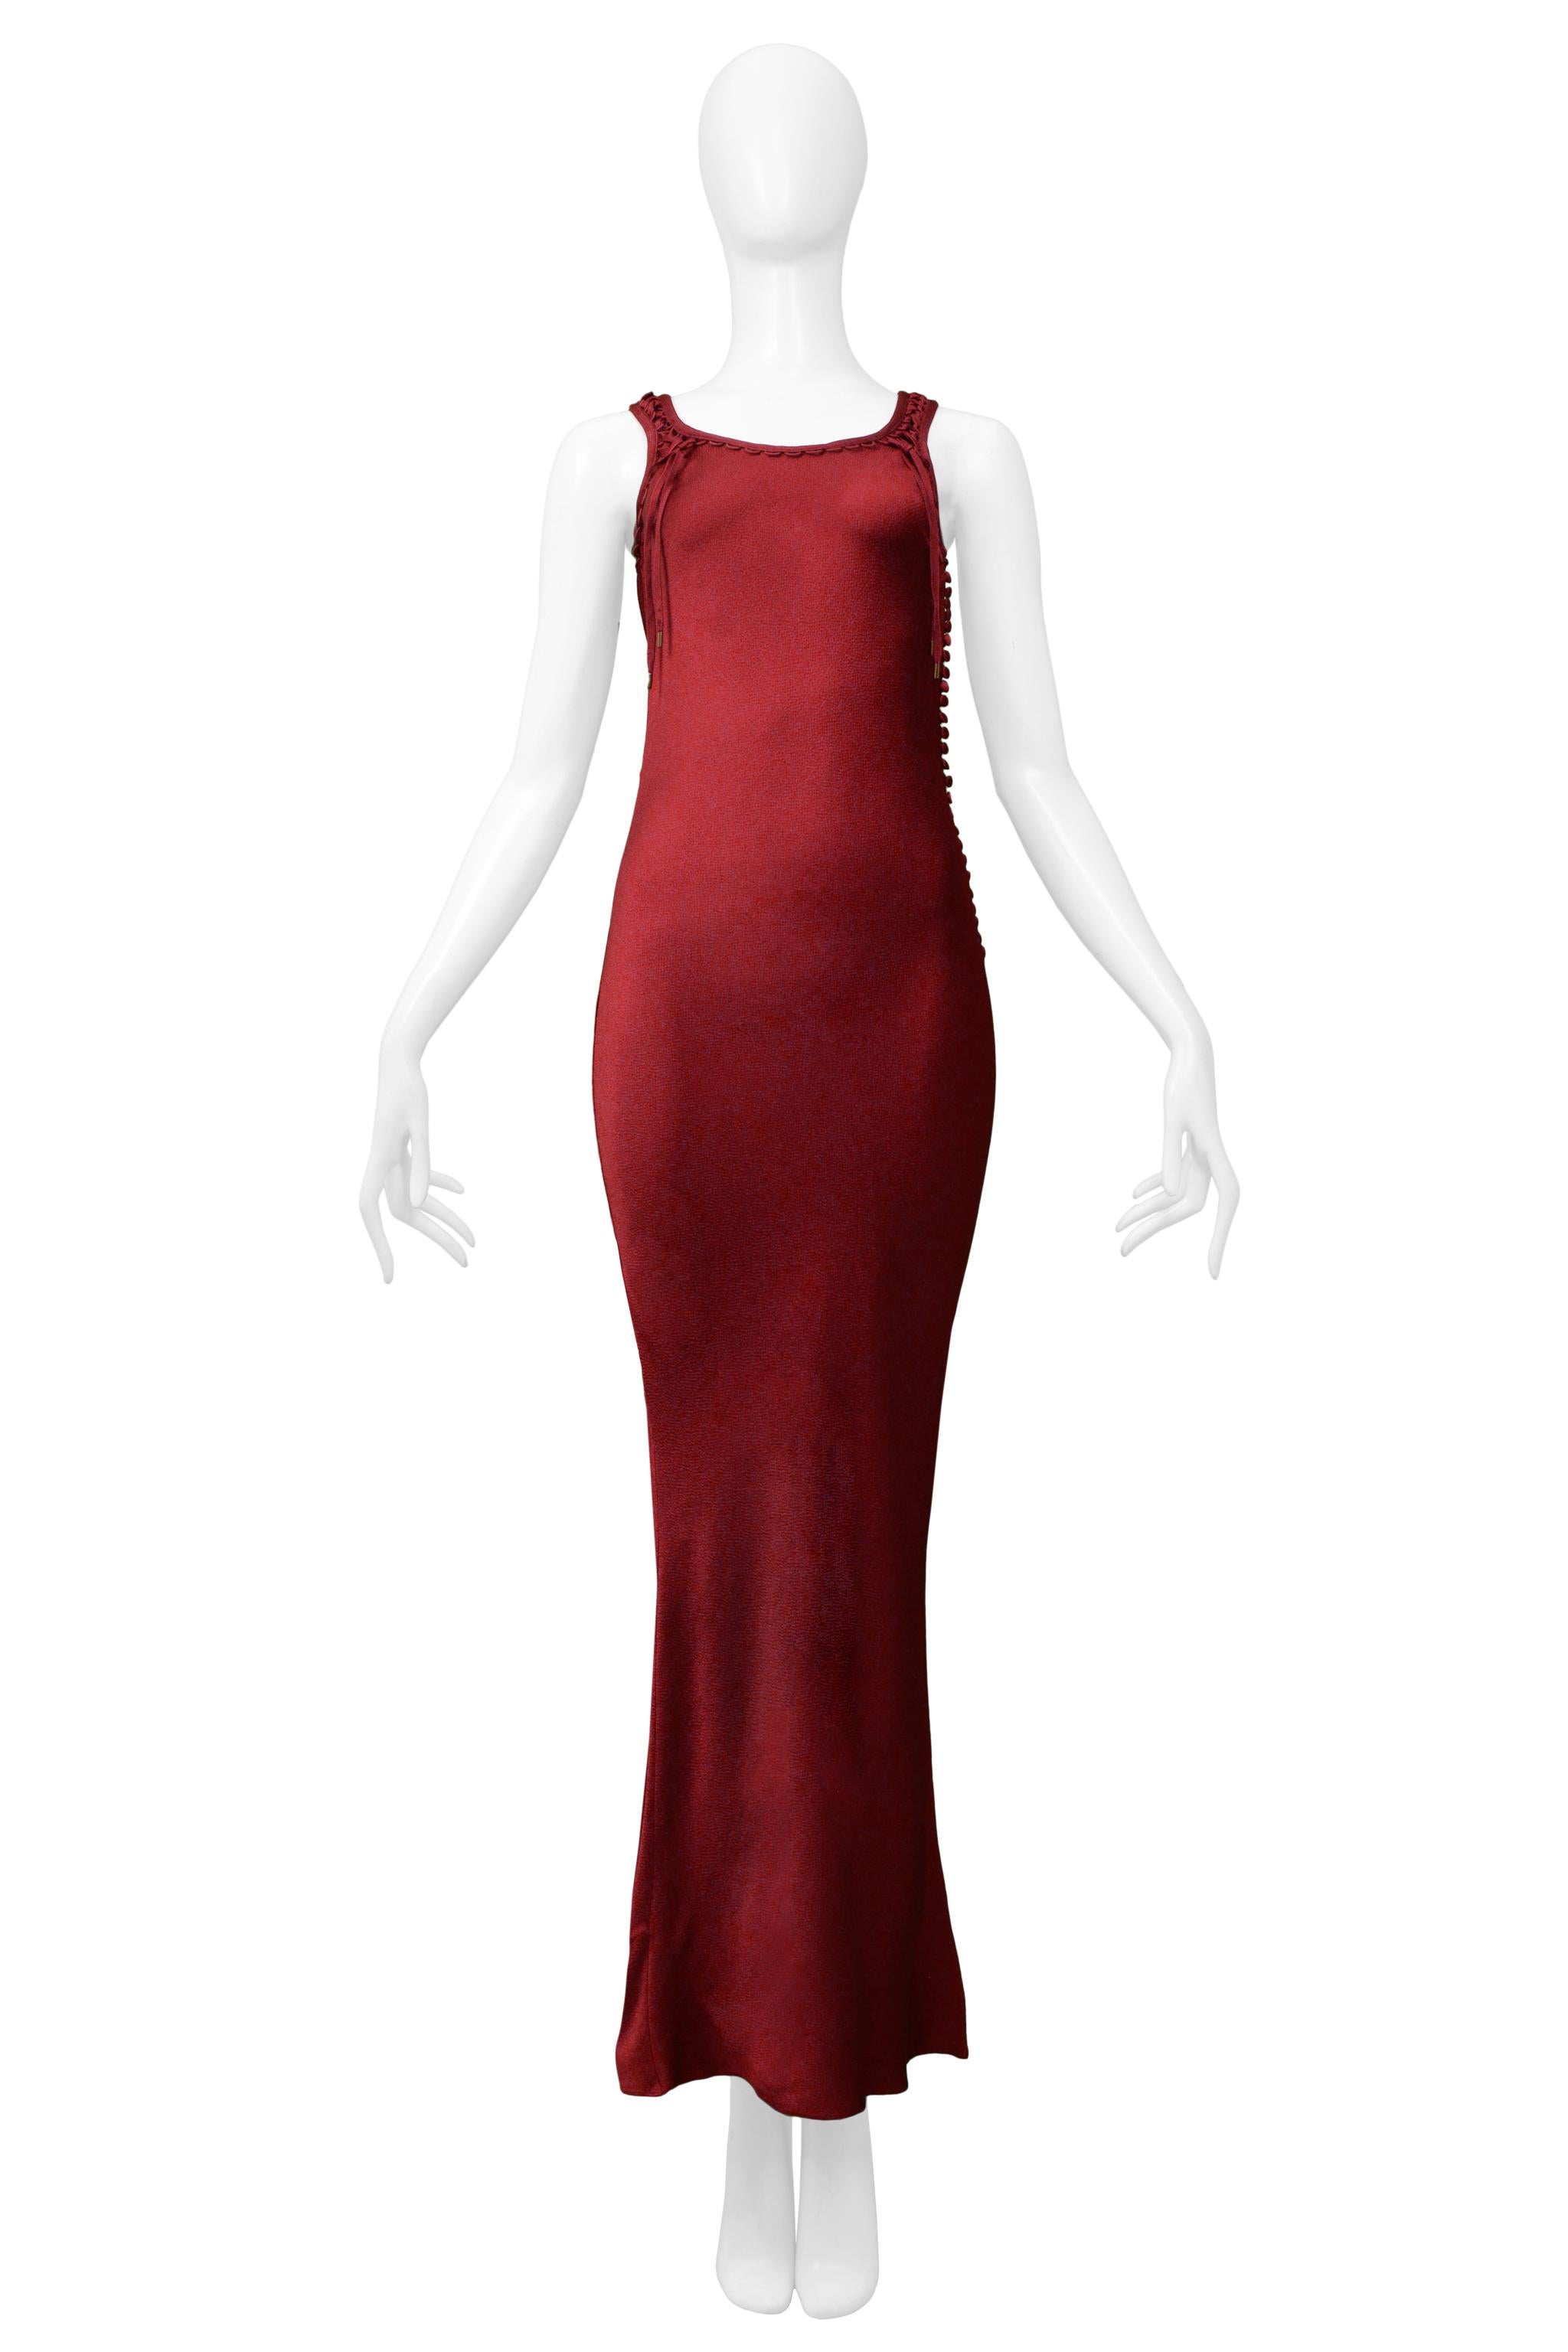 Resurrection Vintage is excited to offer a vintage Christian Dior by John Galliano burgundy slip dress featuring a hammered silk texture, laces around the neckline and tank straps, side slit, and iconic bias cut.

Christian Dior
Designed By John